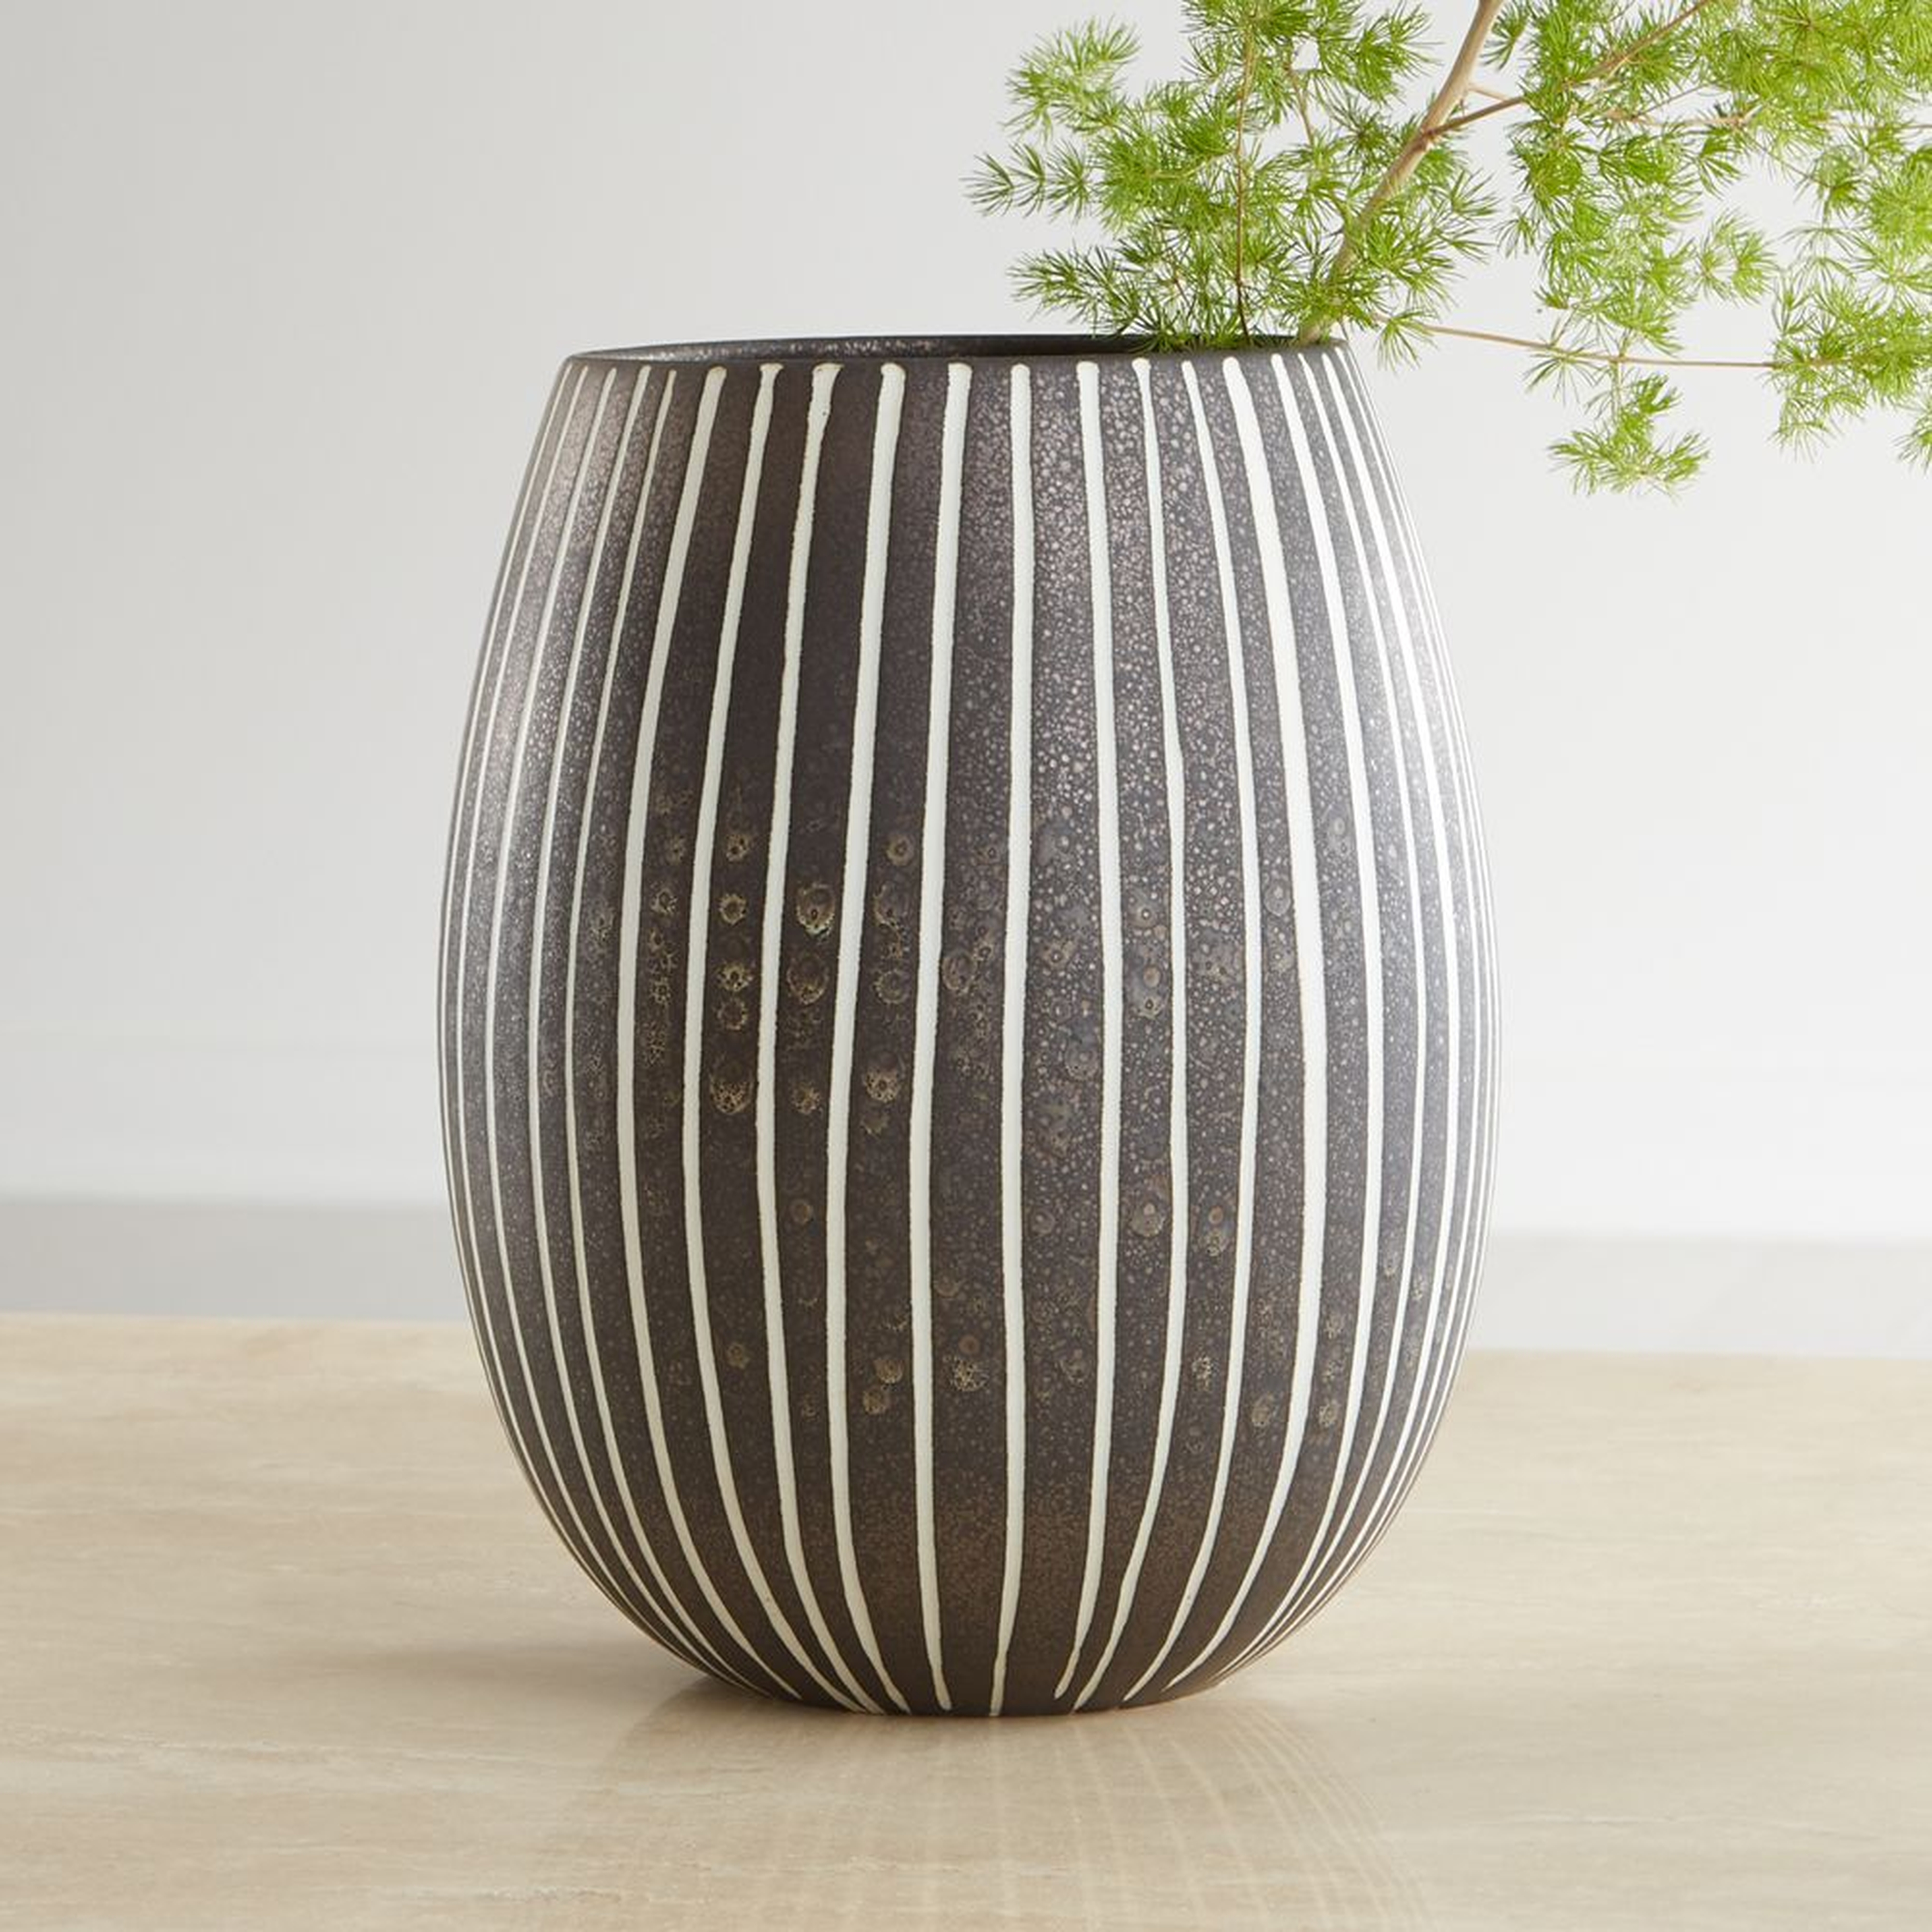 Bolton Black and White Striped Vase - Crate and Barrel